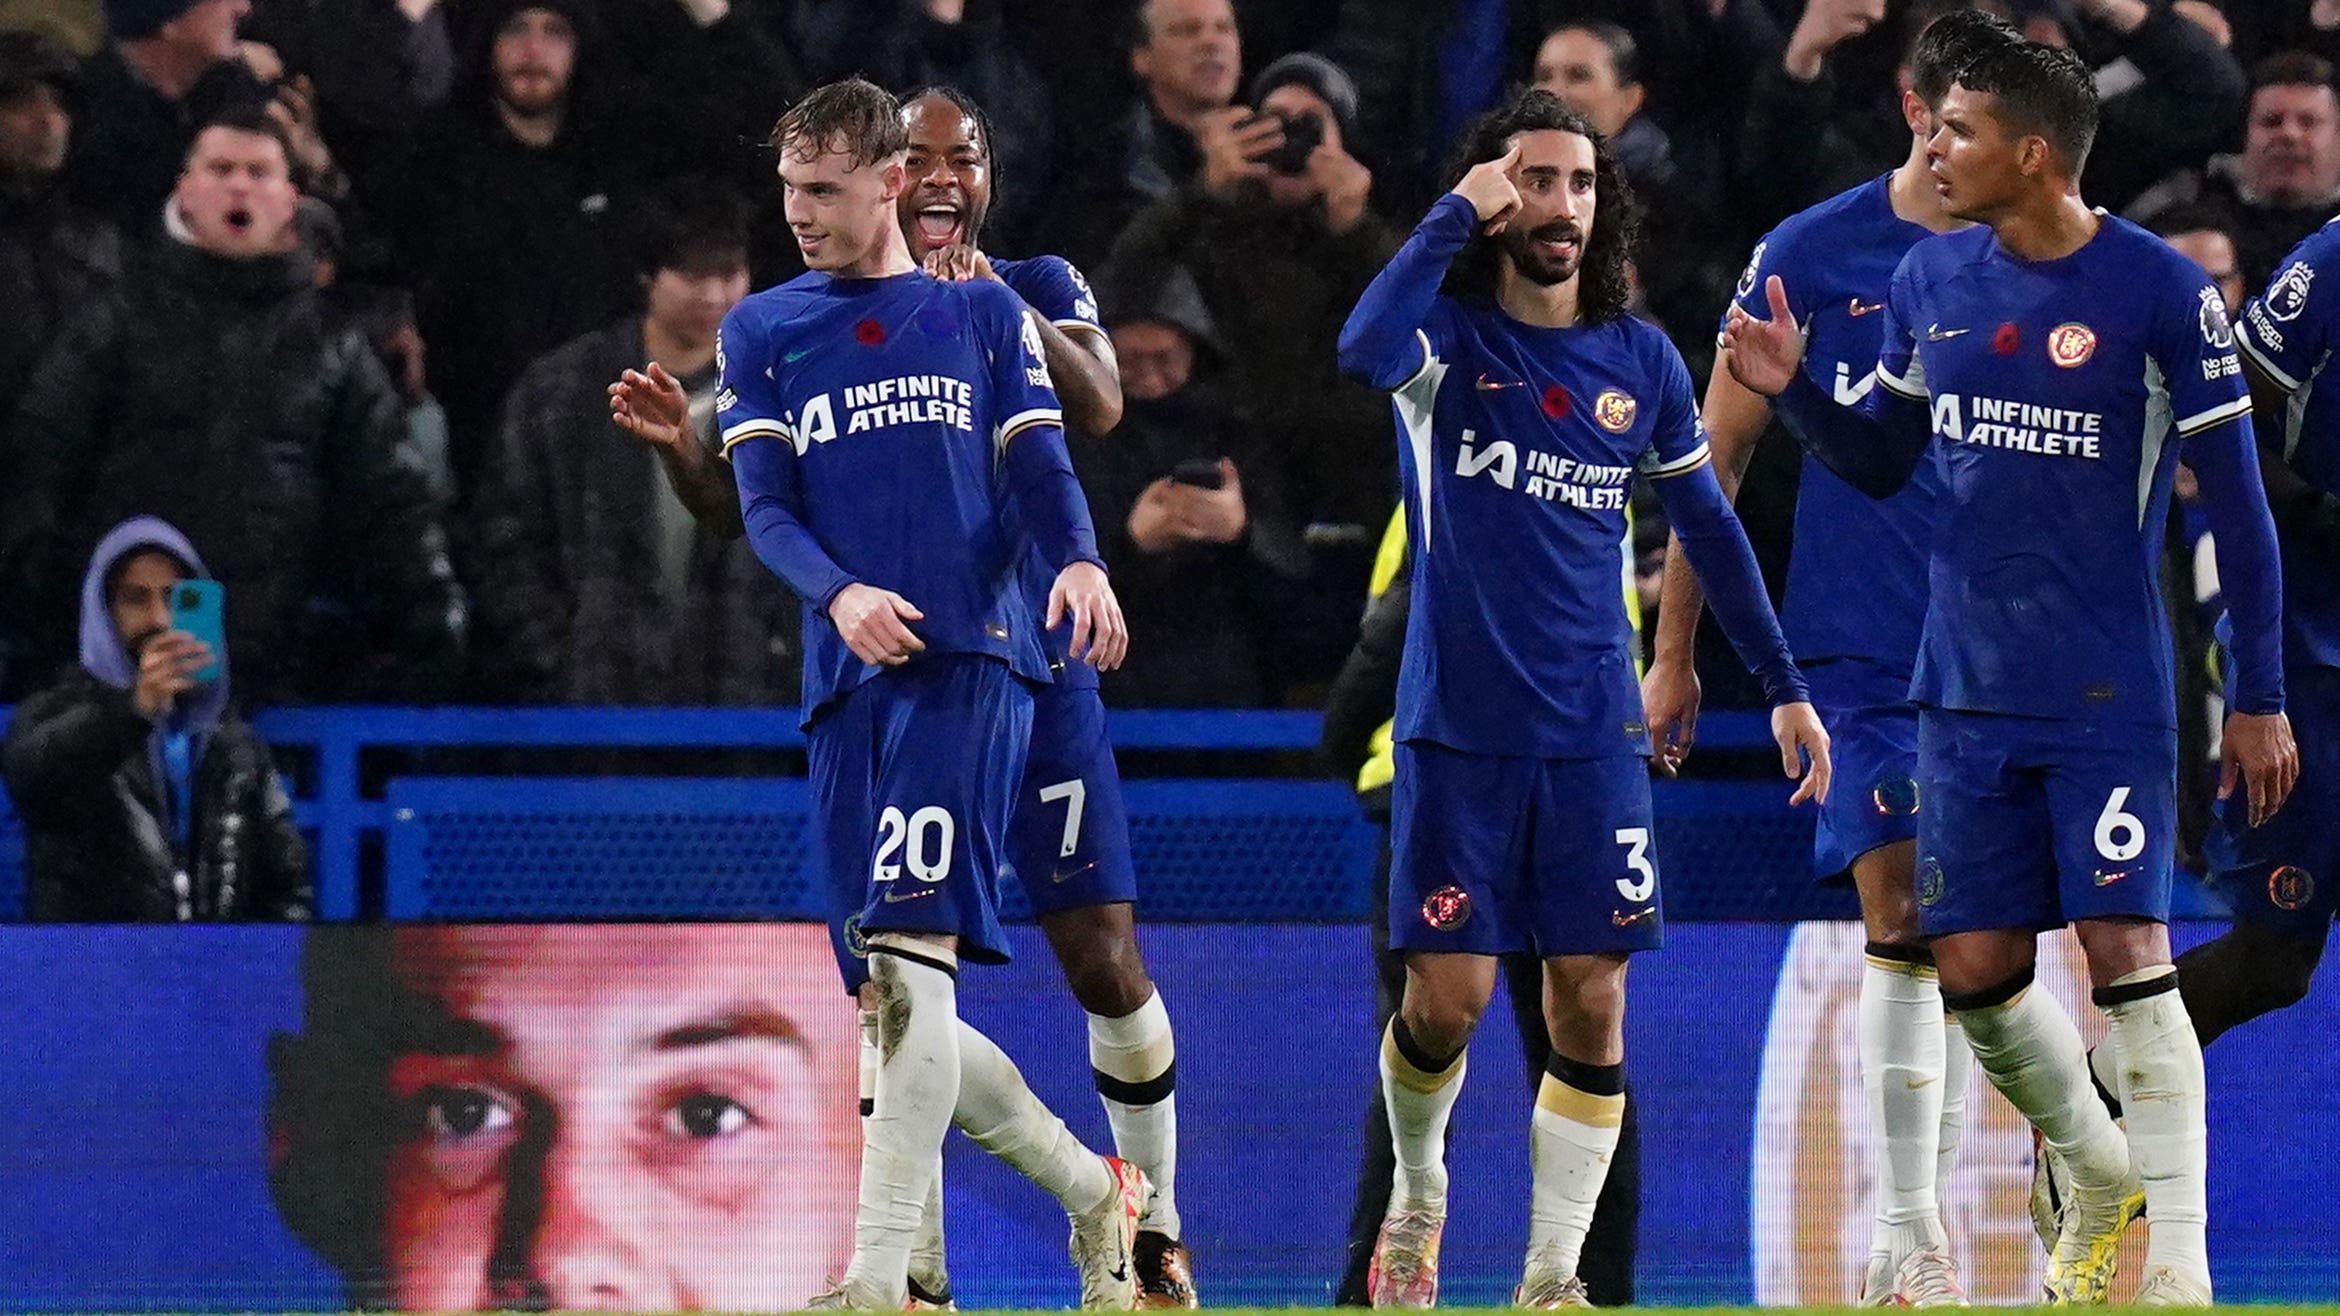 Cole Palmer denies former club Manchester City as Chelsea force draw in thriller